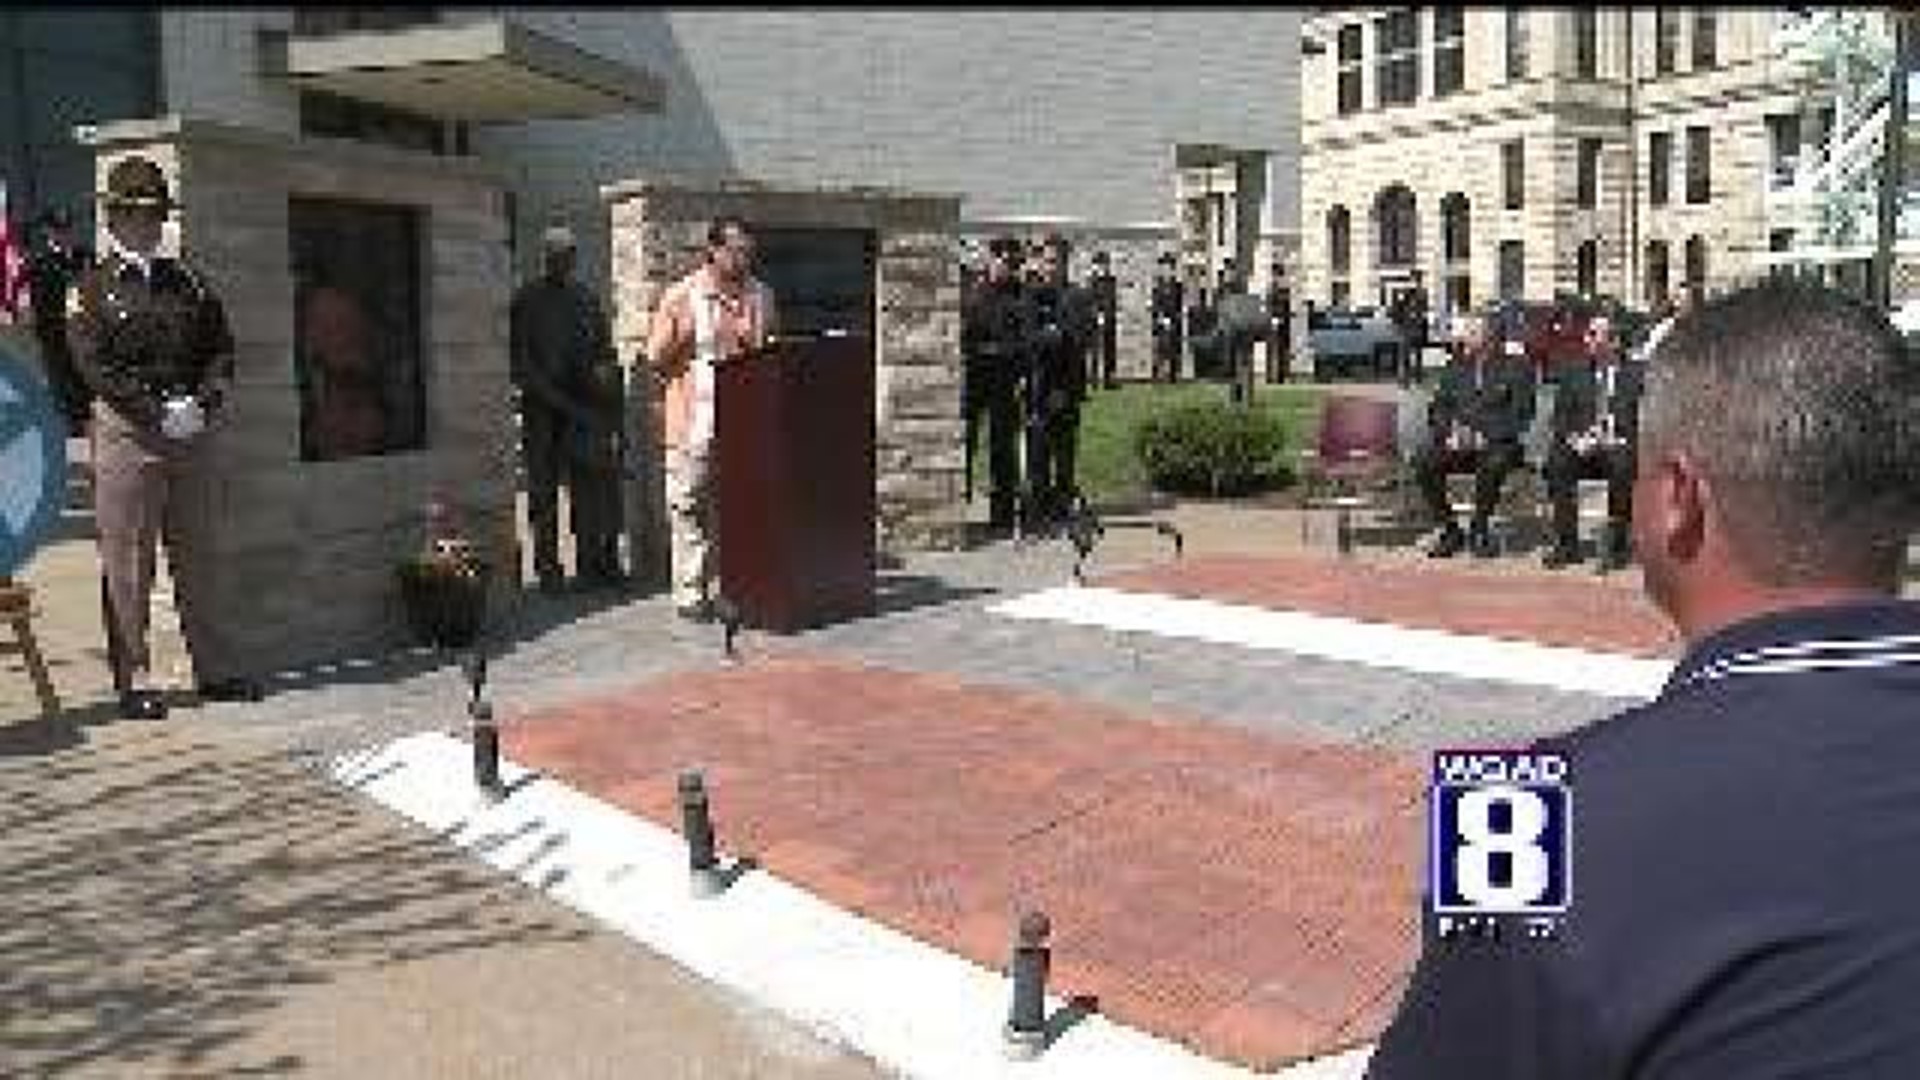 Memorial service to honor fallen officers